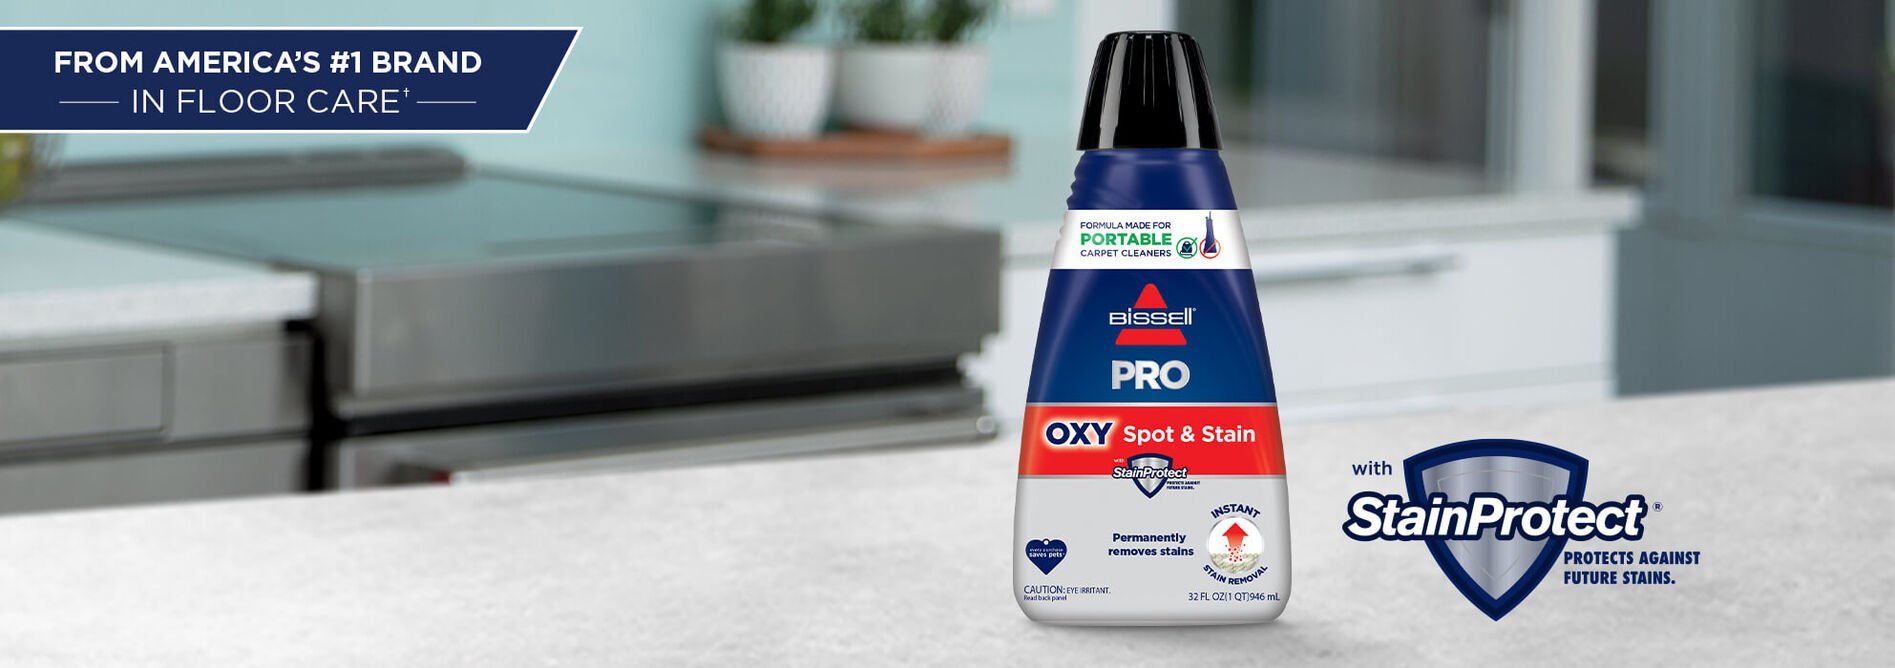 Rug Doctor Spot Upholstery Cleaner; Triple Action Concentrated Formula 32  oz., Oxy Cleaning Power, Deep Cleans, Deodorizes and Protects Upholstery 